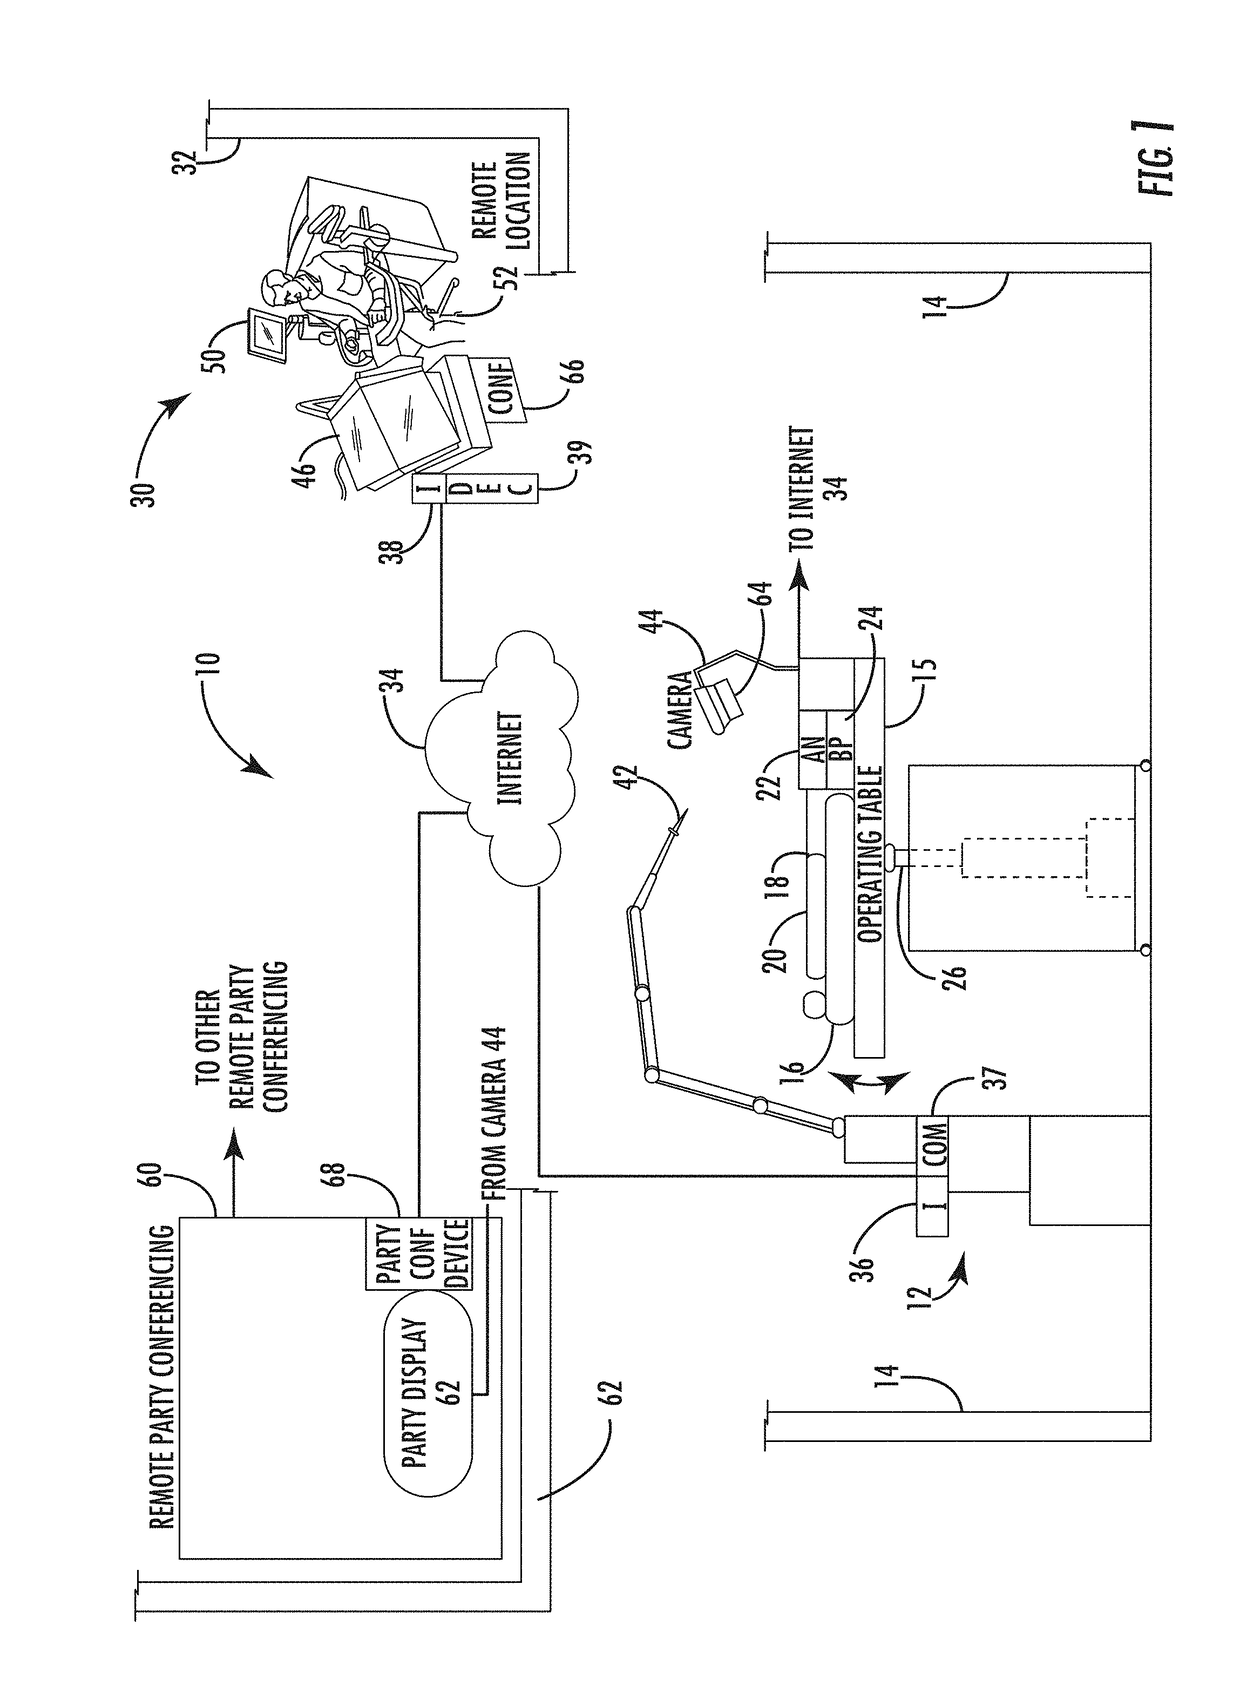 Surgical simulation system using force sensing and optical tracking and robotic surgery system